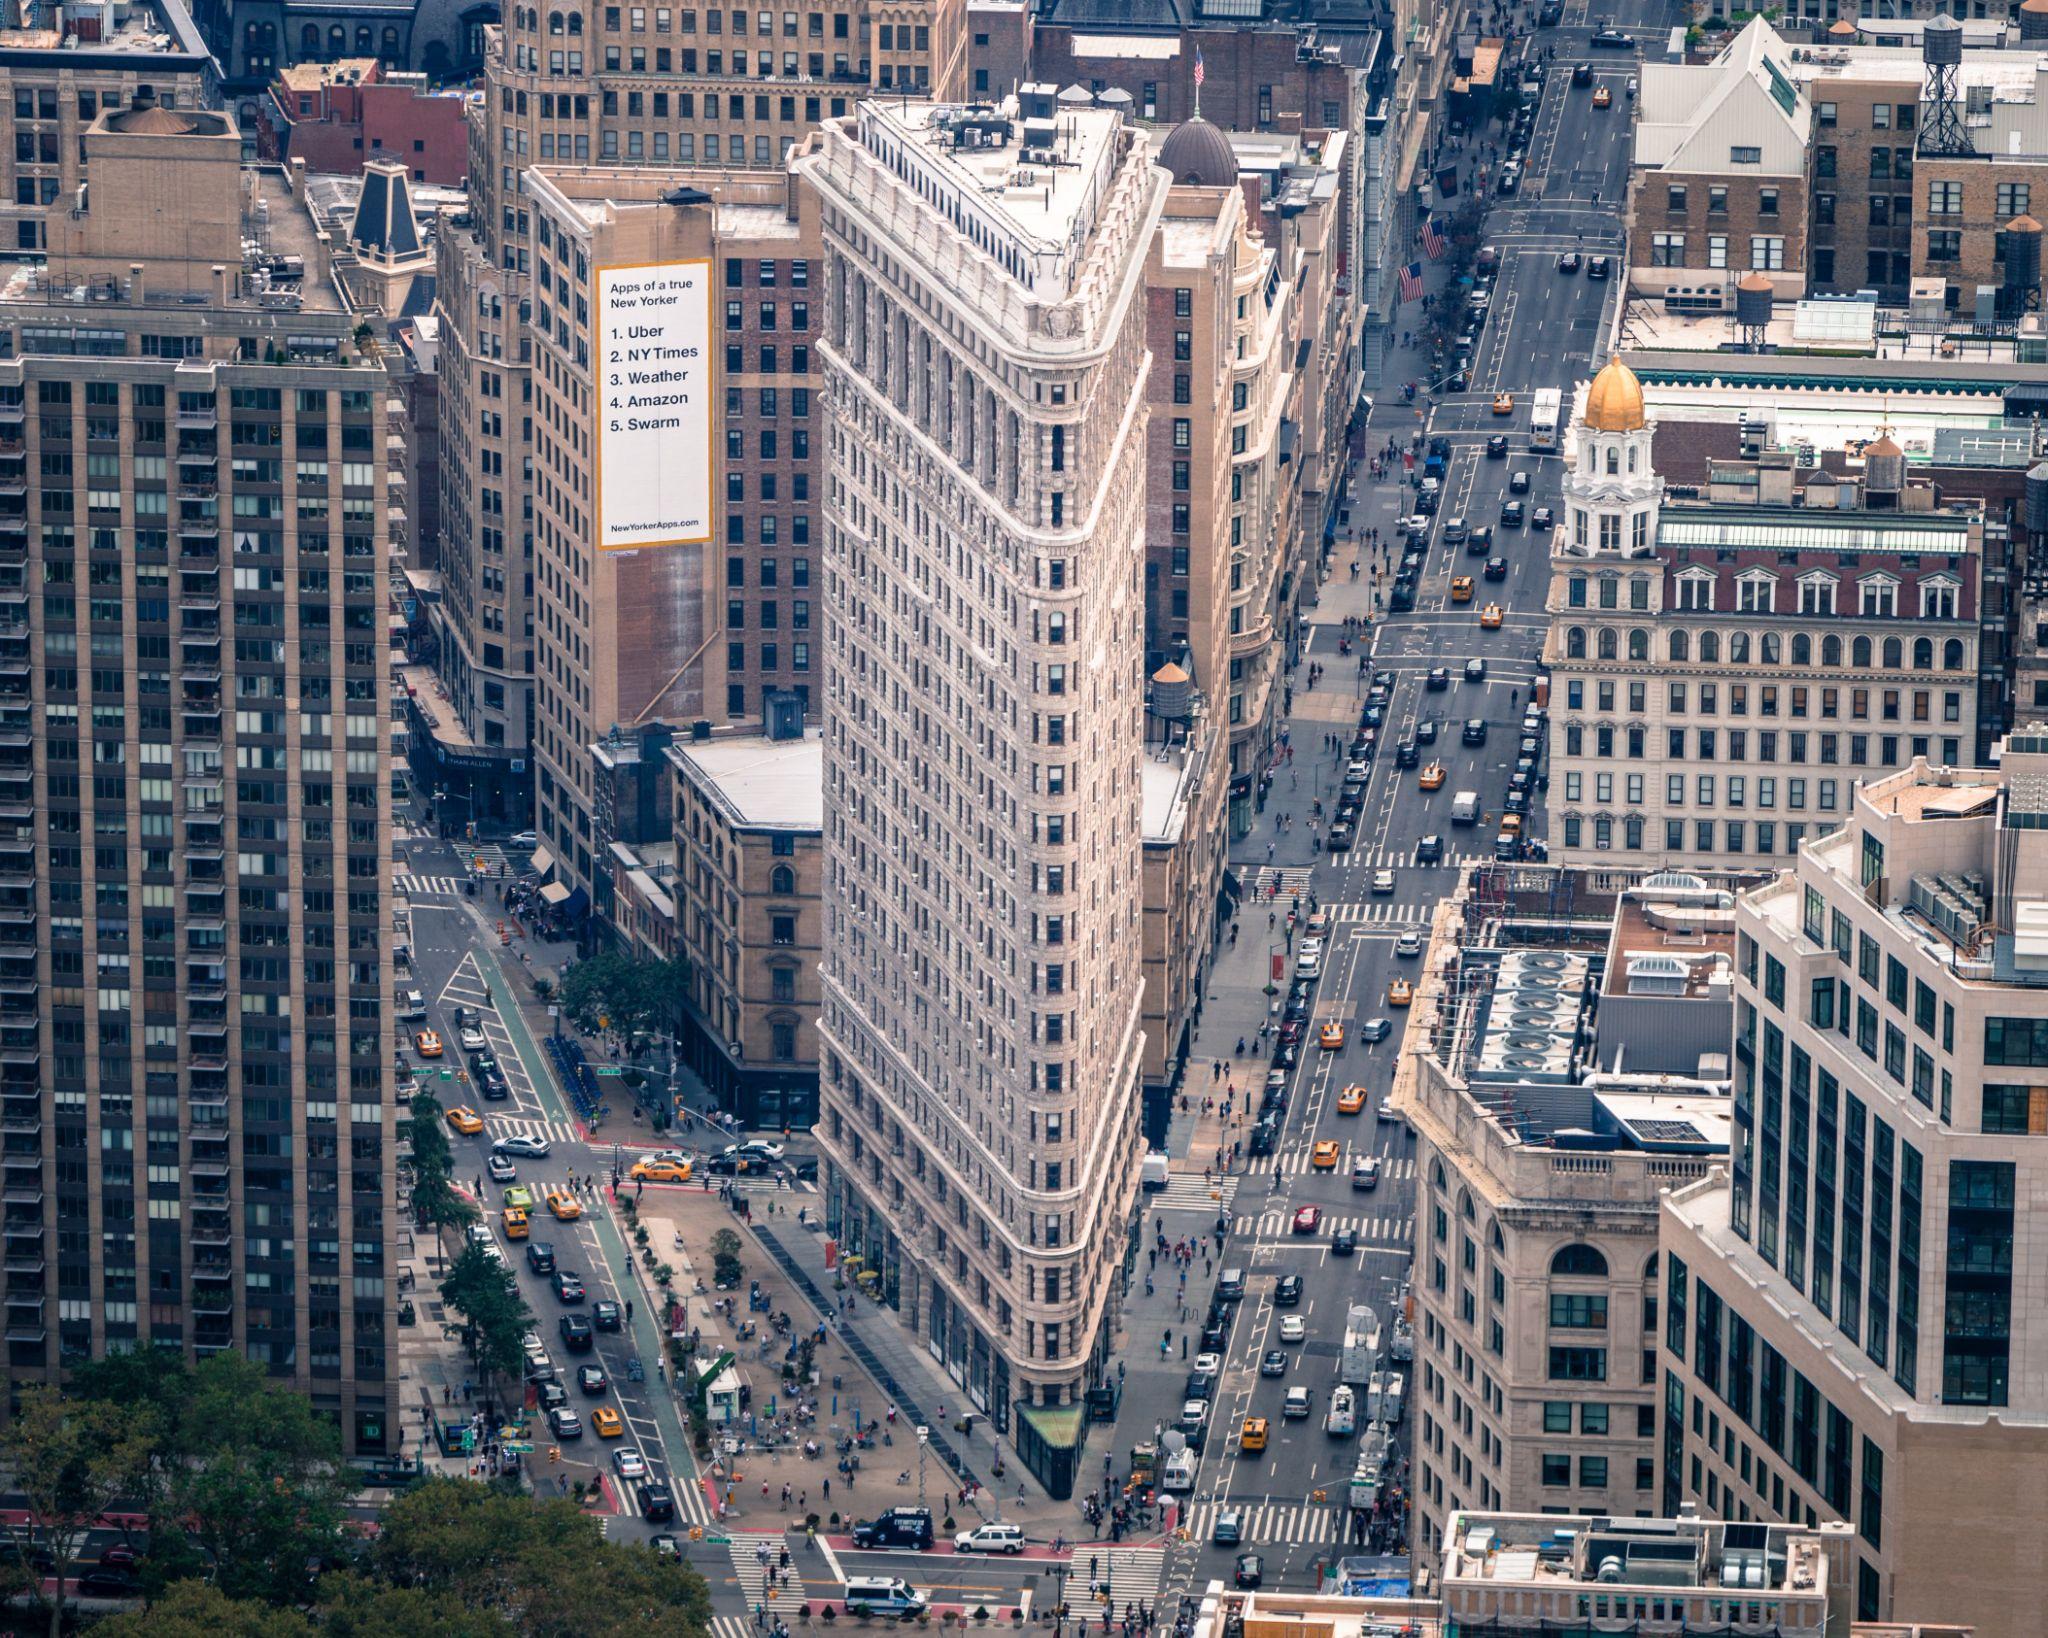 Flatiron, New York’s iconic skyscraper that was expected to blow over